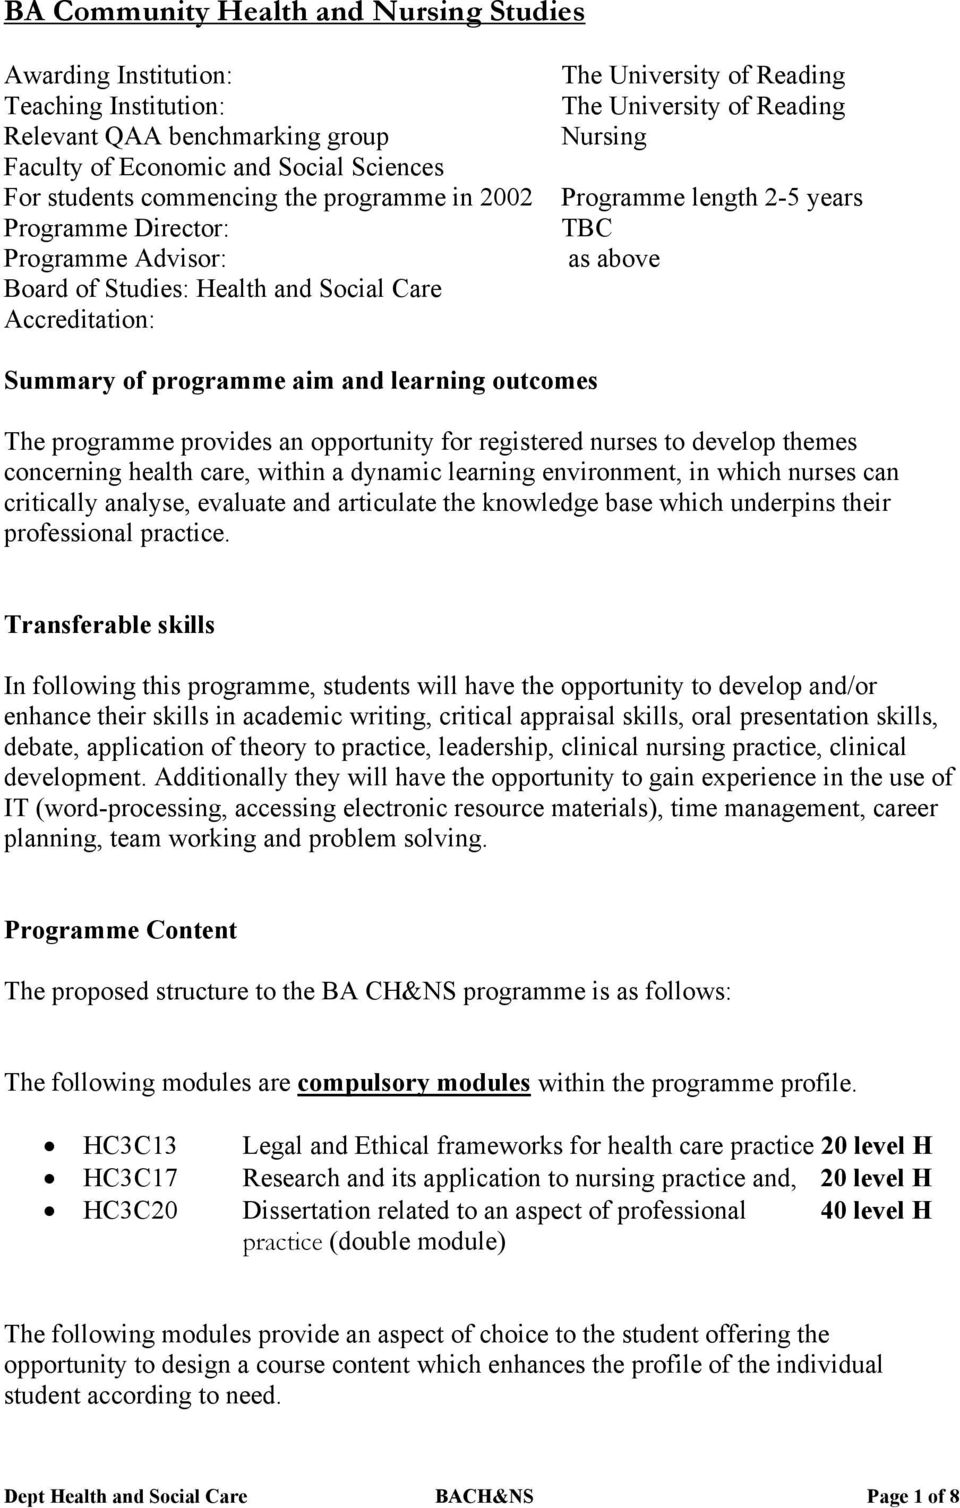 Summary of programme aim and learning outcomes The programme provides an opportunity for registered nurses to develop themes concerning health care, within a dynamic learning environment, in which